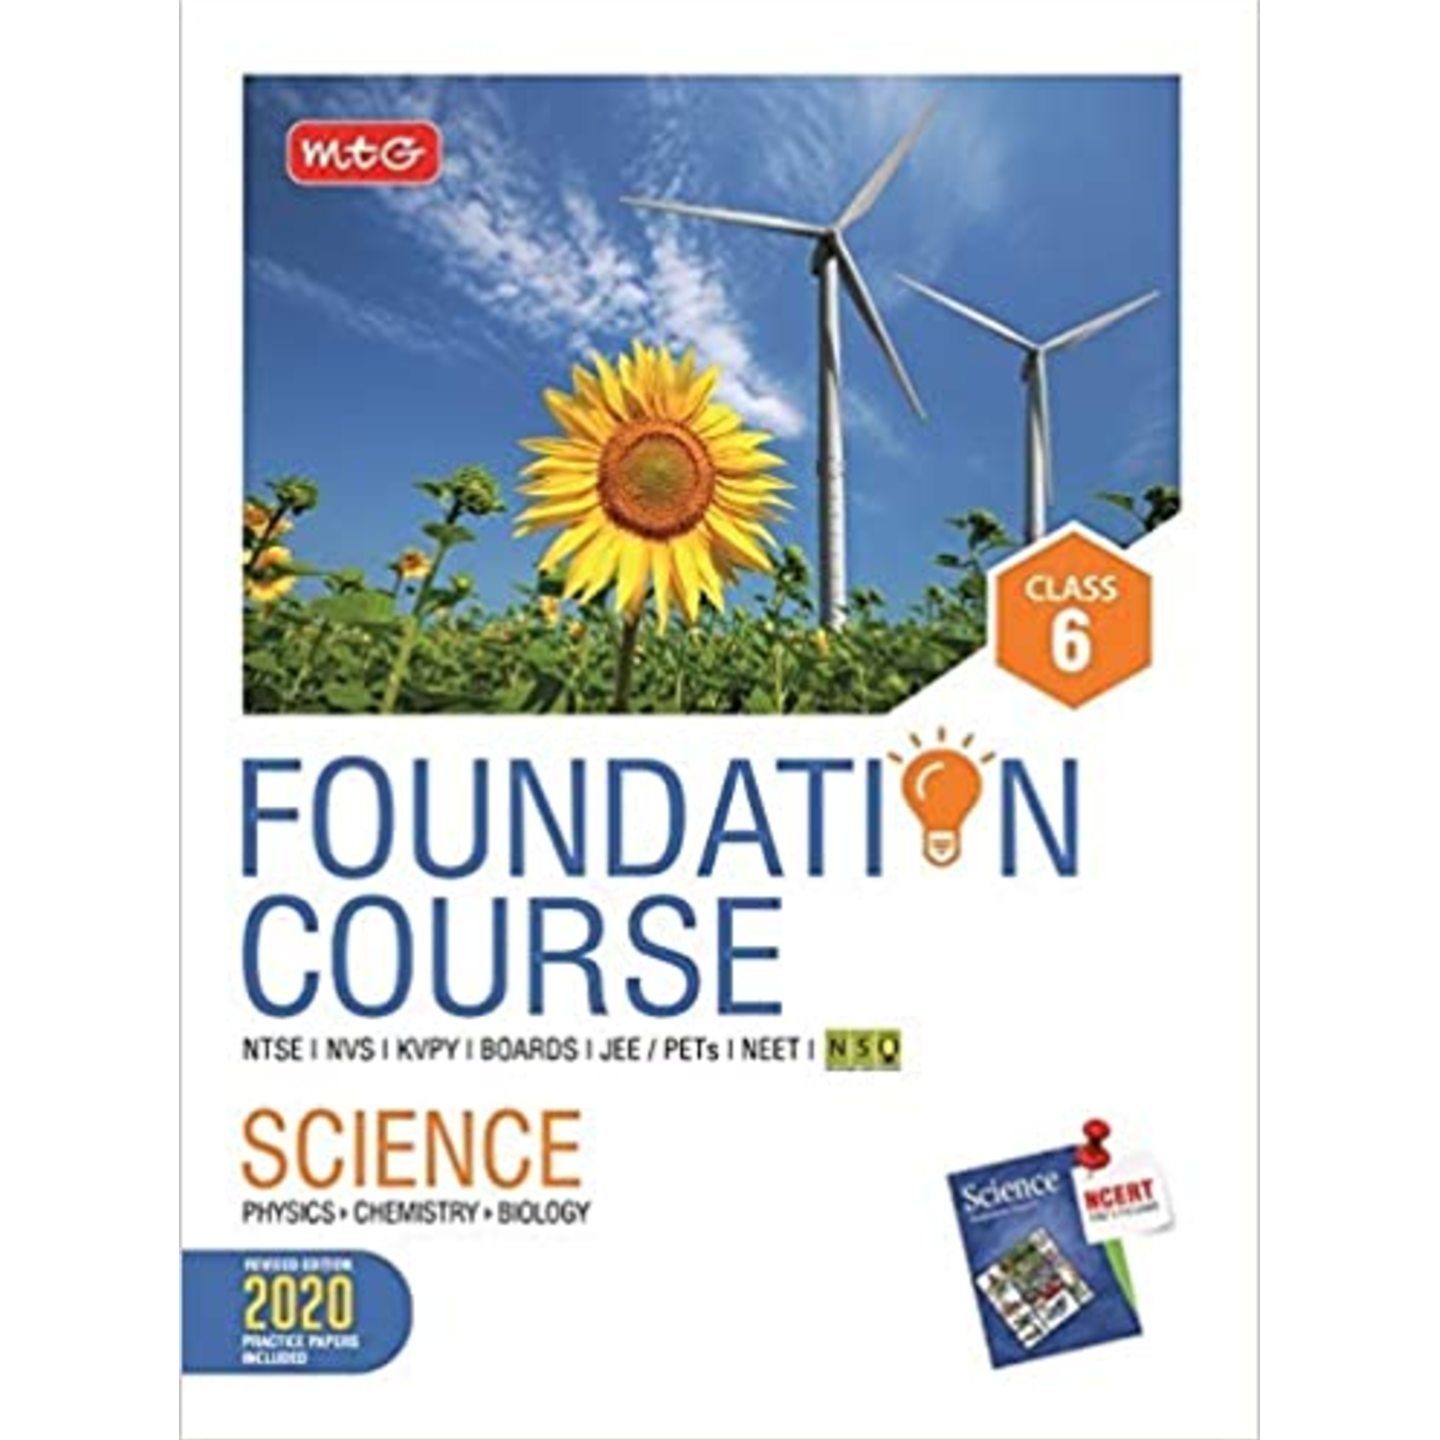 Science Foundation Course For JEENEETNSOOlympiad-Class 6